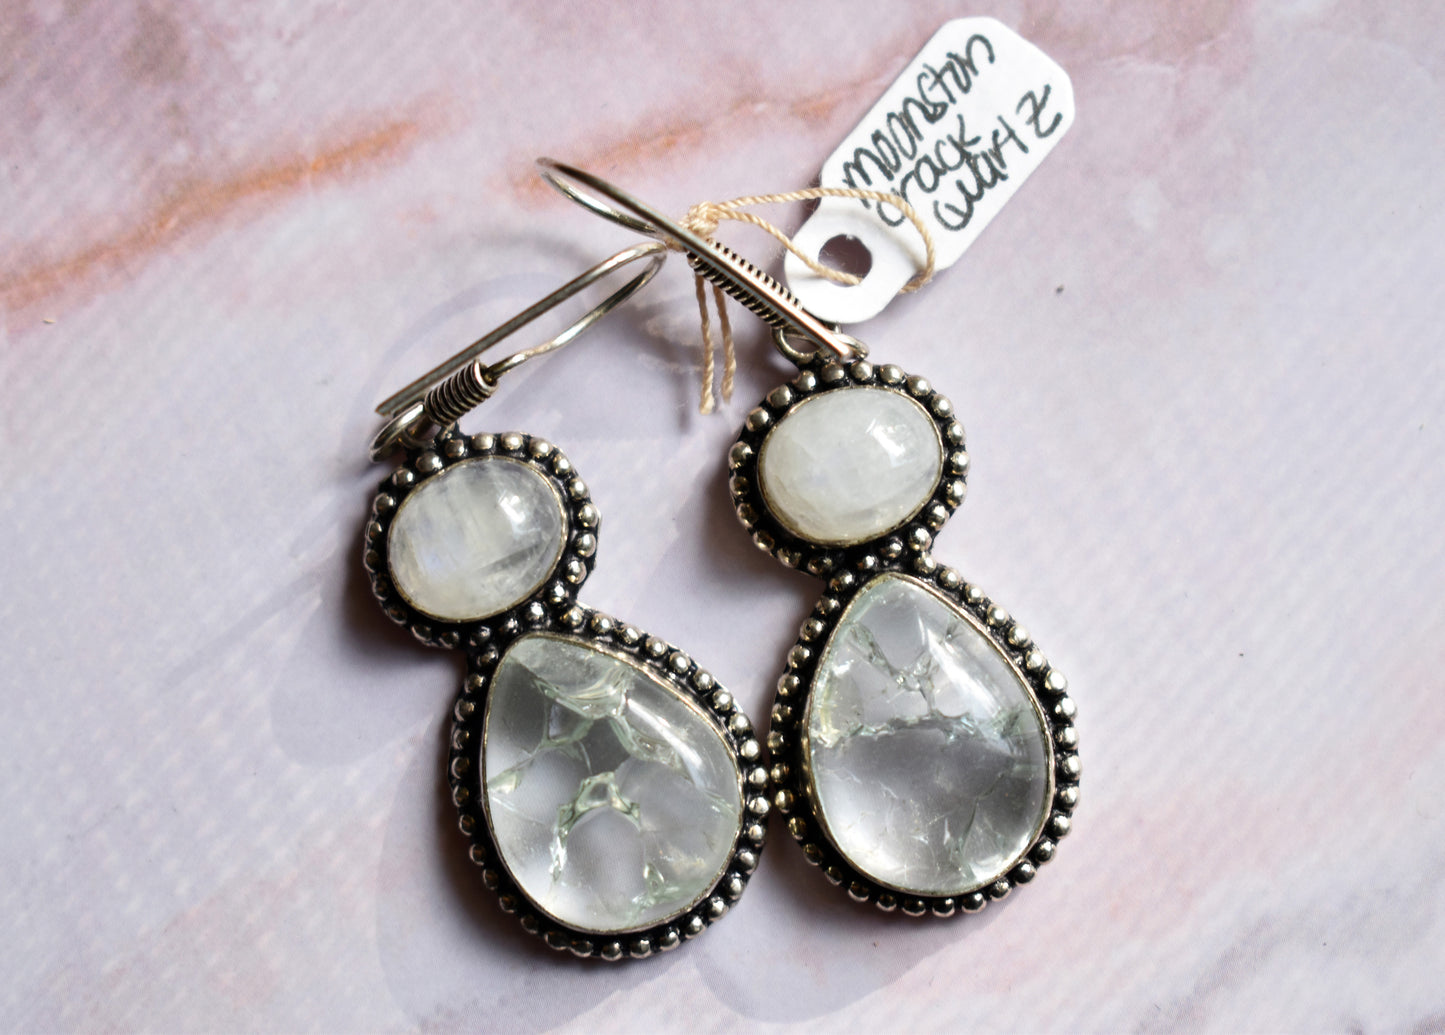 stones-of-transformation - Moonstone with Cracked Quartz Earrings - Stones of Transformation - 